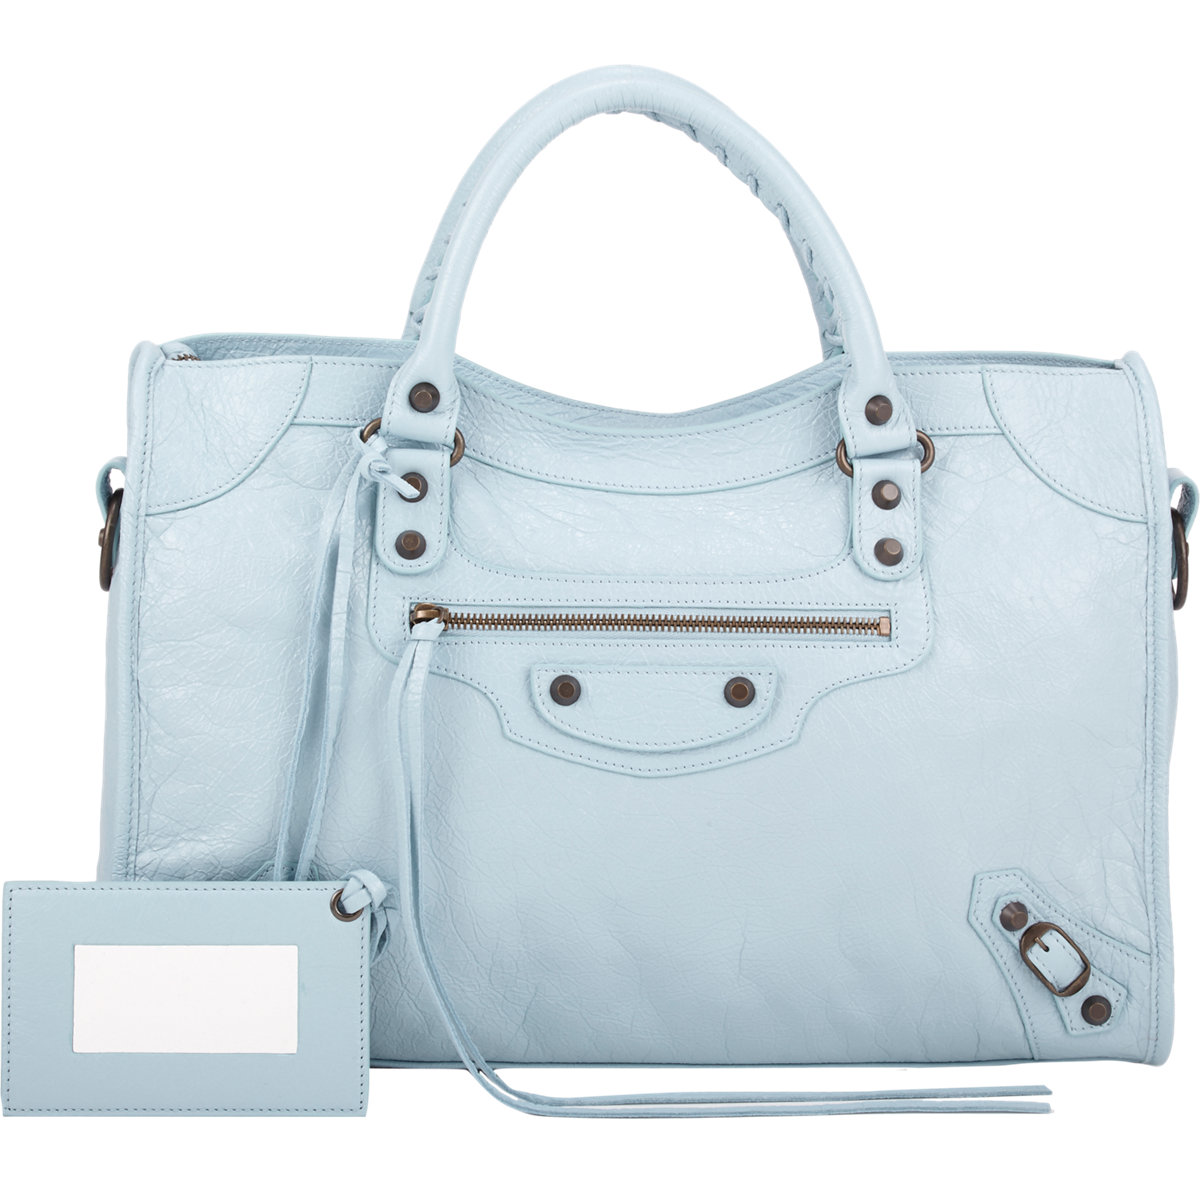 Must-have Monday: Spring Bag